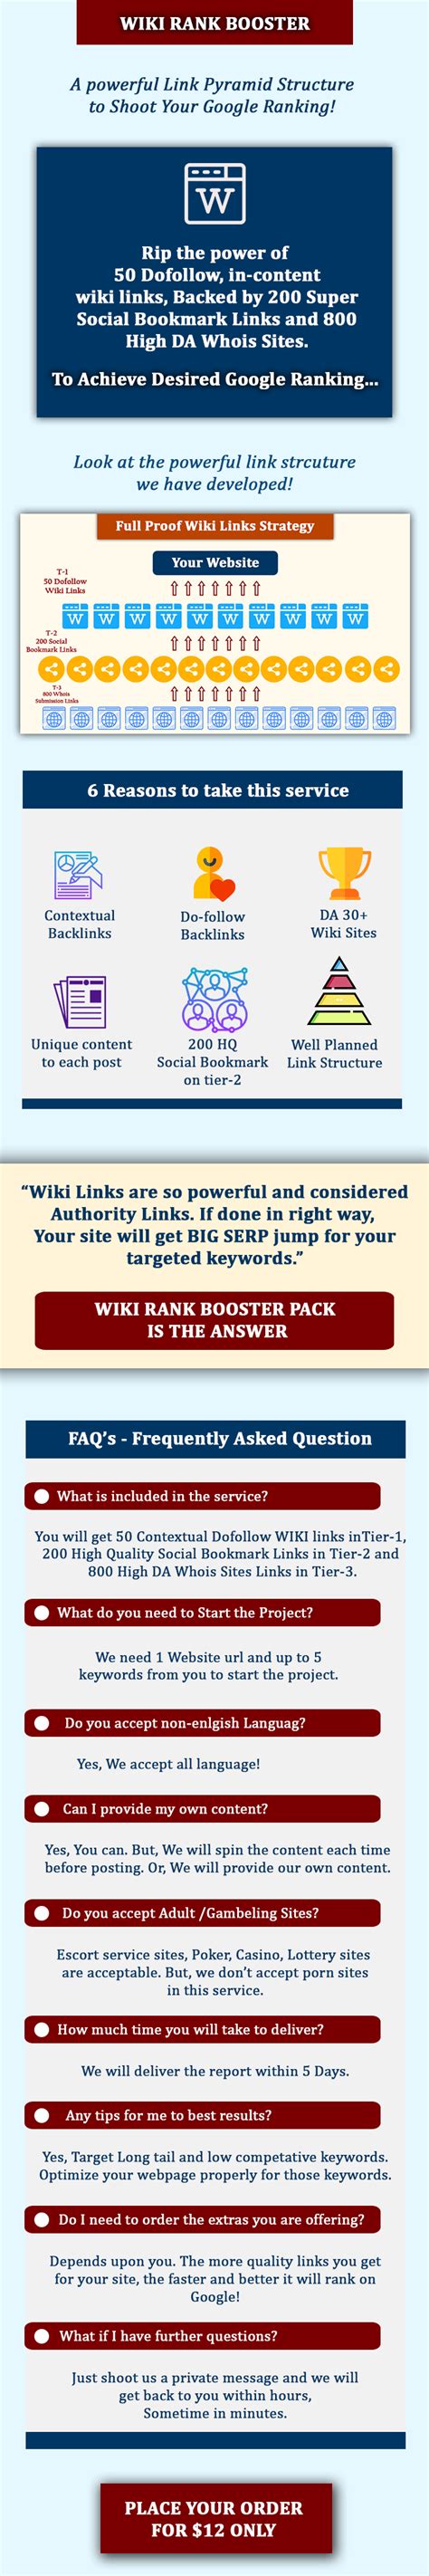 wiki rank booster ultimate wiki link pyramid to super